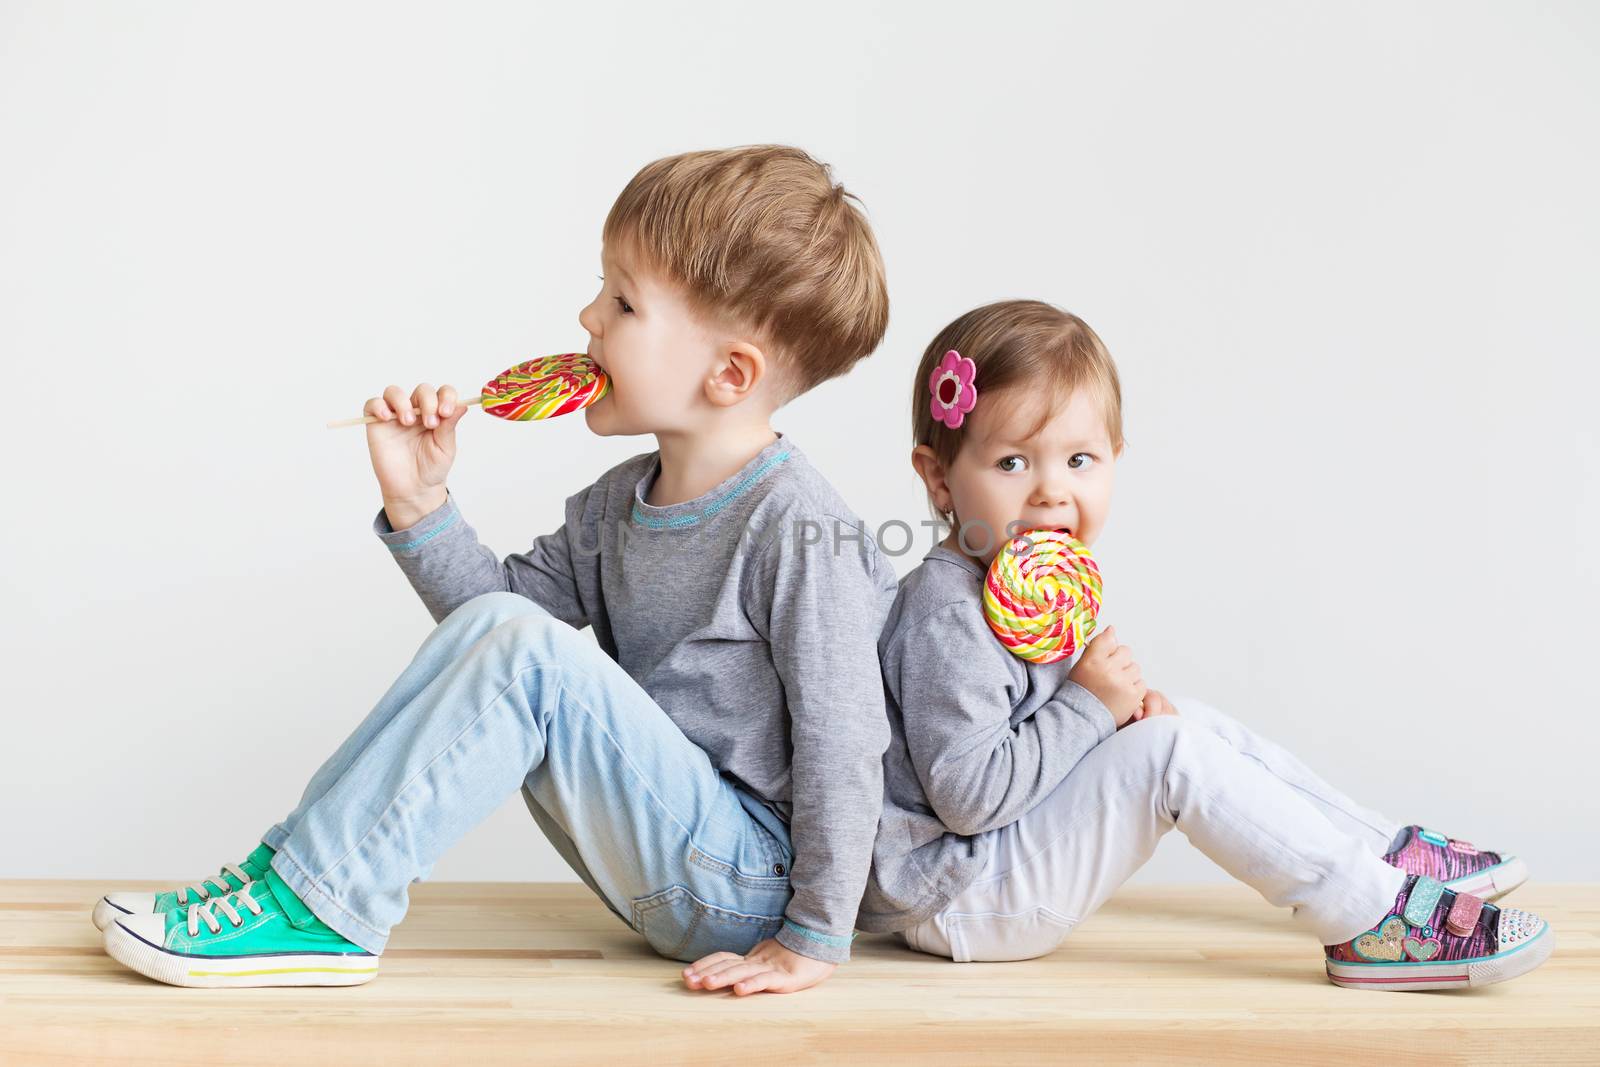 Little children eating lollipops. Happy kids with a big candy. Portrait of a happy little children - boy and girl. Beautiful kids against a white background